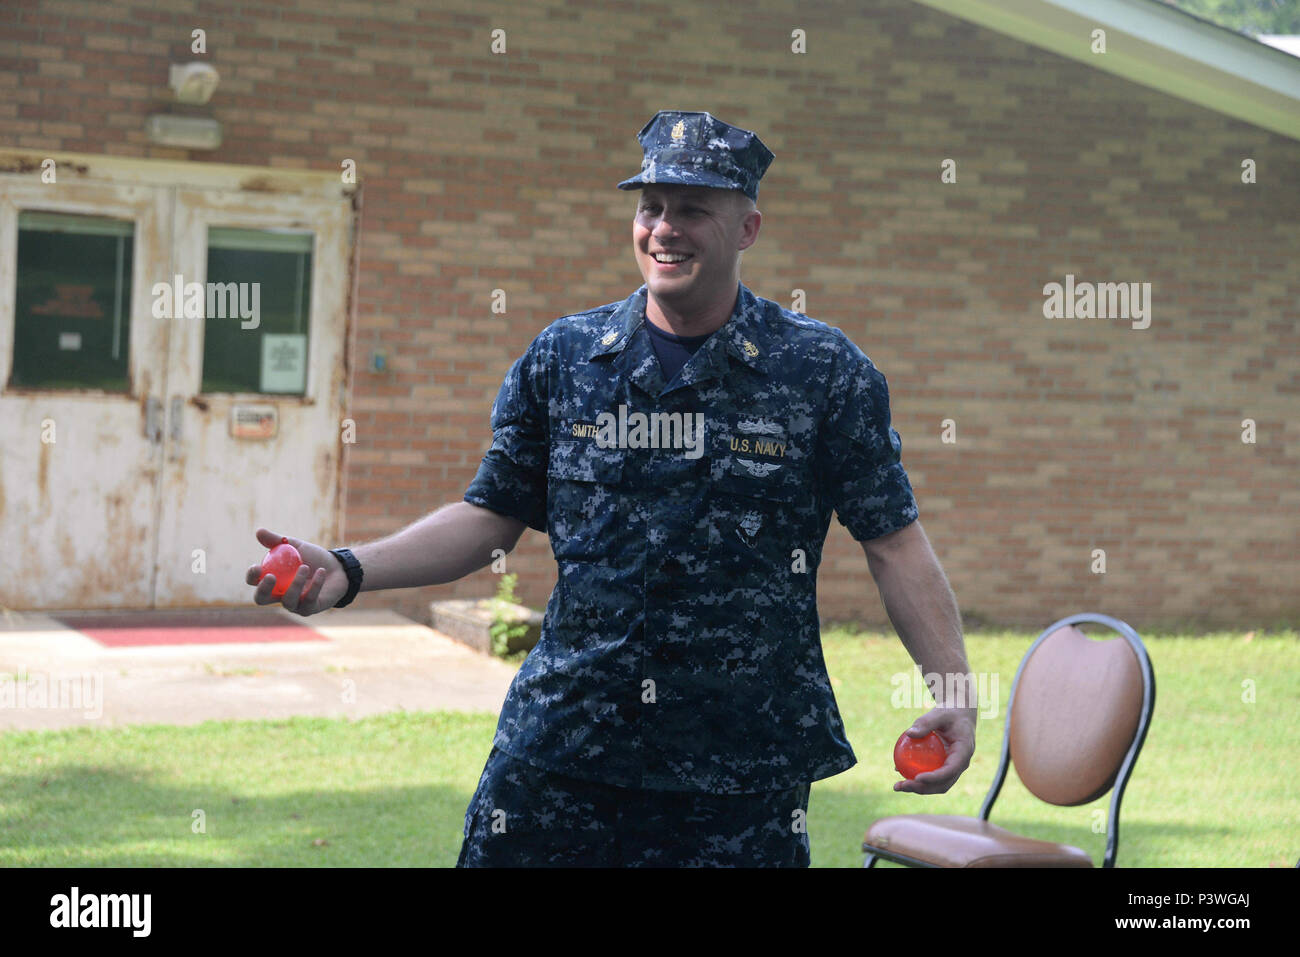 160722-N-FU443-020 NASHVILLE (July 22, 2016) Chief Electrician's Mate (Nuclear) Jeremy Smith assists with handing out water balloons during an outdoor game where residents attempted to sink paper battleships with squirt guns and water balloons at the Azalea Trace Assisted Living facility. Several members of Navy Recruiting District Nashville volunteered for the event in order to reach out to local members of the community. (U.S. Navy photo by Mass Communication Specialist 1st Class Timothy Walter/Released) Stock Photo